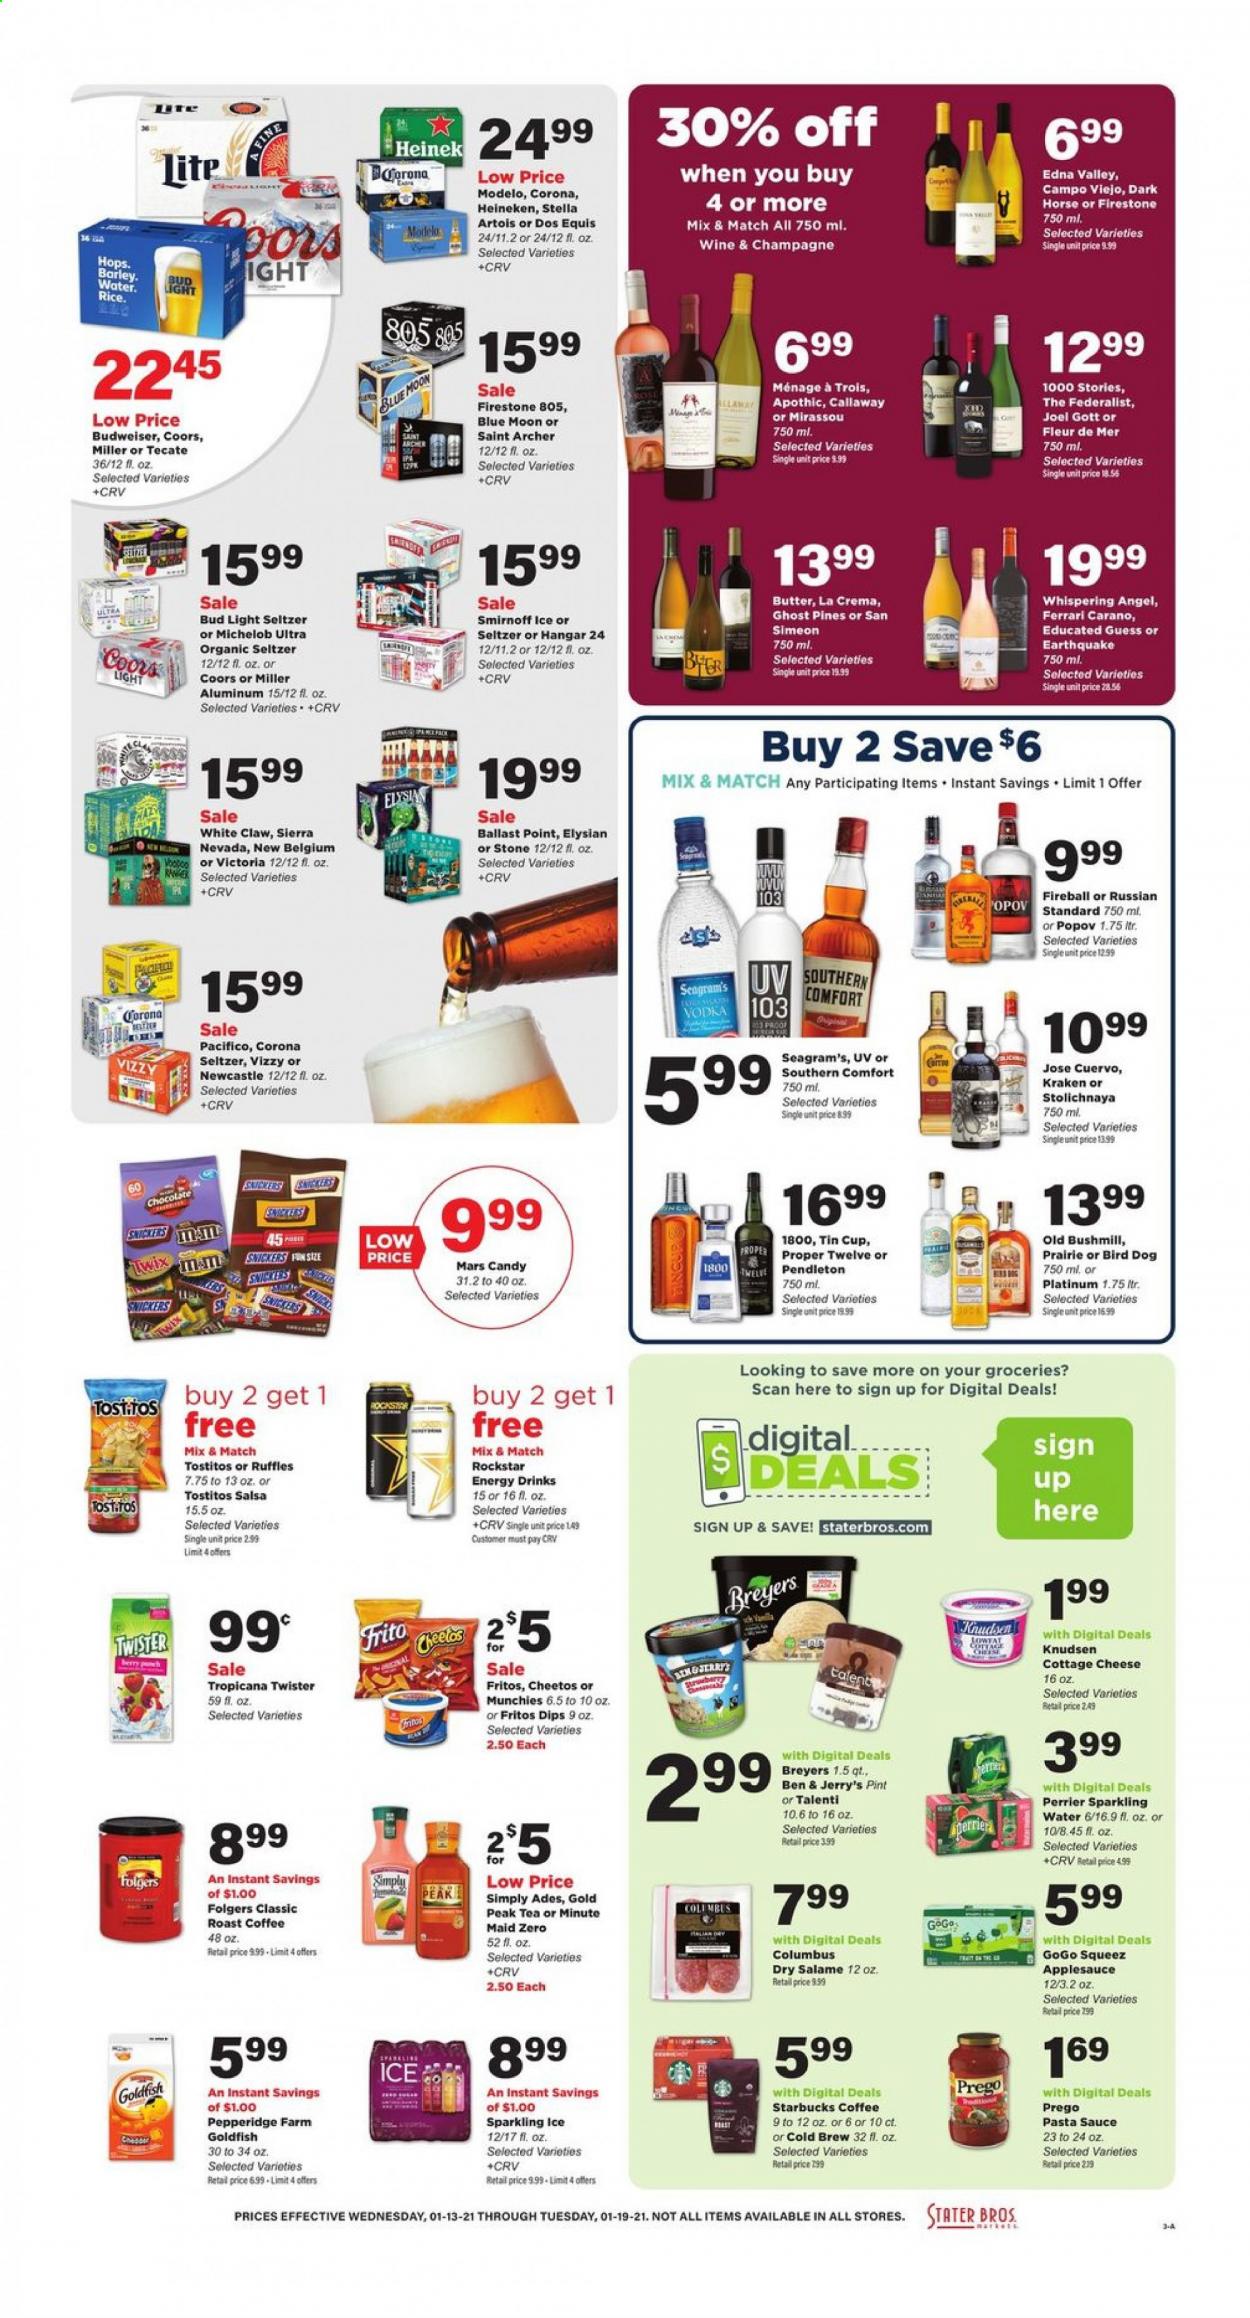 thumbnail - Stater Bros. Flyer - 01/13/2021 - 01/19/2021 - Sales products - pasta sauce, salami, cottage cheese, coffee drink, butter, dip, ice cream, Ben & Jerry's, Talenti Gelato, Snickers, Twix, Mars, Candy, Fritos, Cheetos, Goldfish, Ruffles, Tostitos, salsa, apple sauce, lemonade, energy drink, fruit drink, ice tea, Gold Peak Tea, Perrier, Tropicana Twister, Rockstar, flavored water, water, coffee, Starbucks, Folgers, red wine, wine, Campo Viejo, liqueur, Smirnoff, tequila, vodka, White Claw, Hard Seltzer, Bushmill's, beer, Budweiser, Stella Artois, Bud Light, Corona Extra, Heineken, Miller, Modelo, baby food pouch, baby snack, cup, Coors, Dos Equis, Blue Moon, Michelob. Page 3.